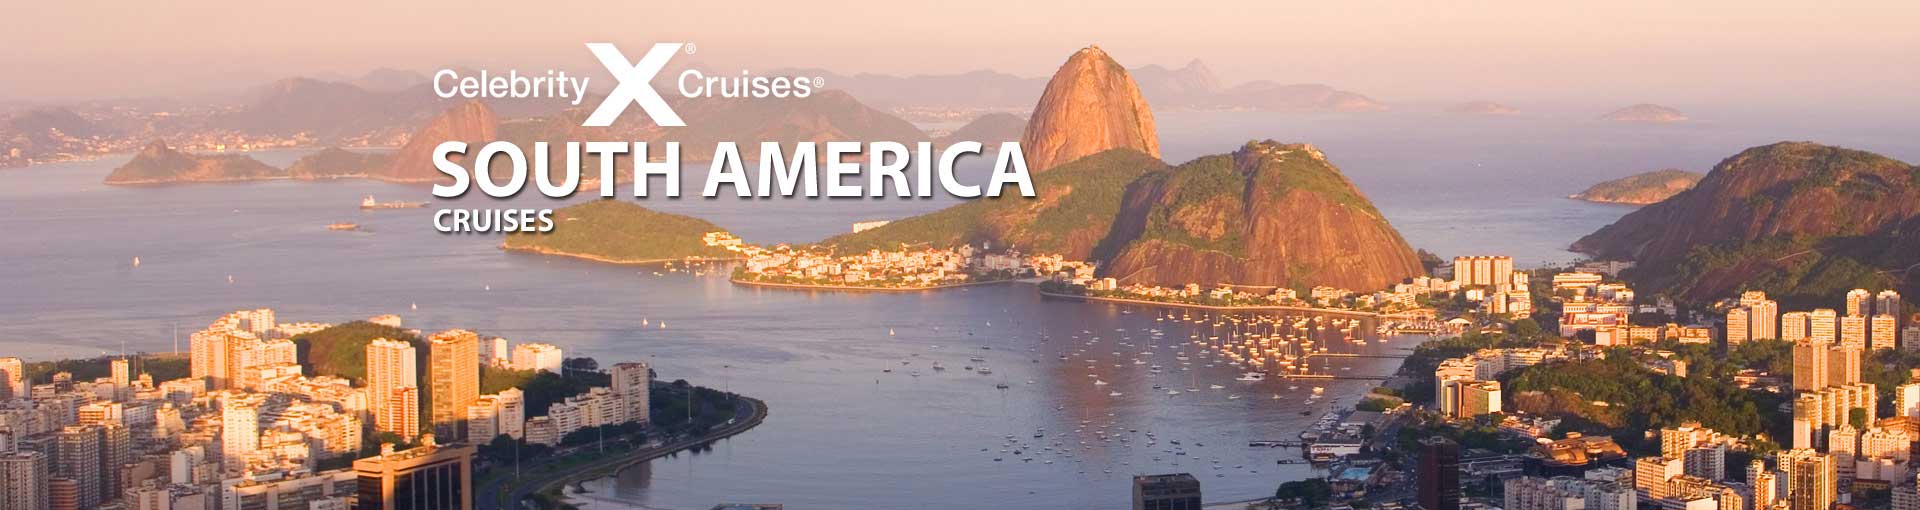 celebrity cruises in south america